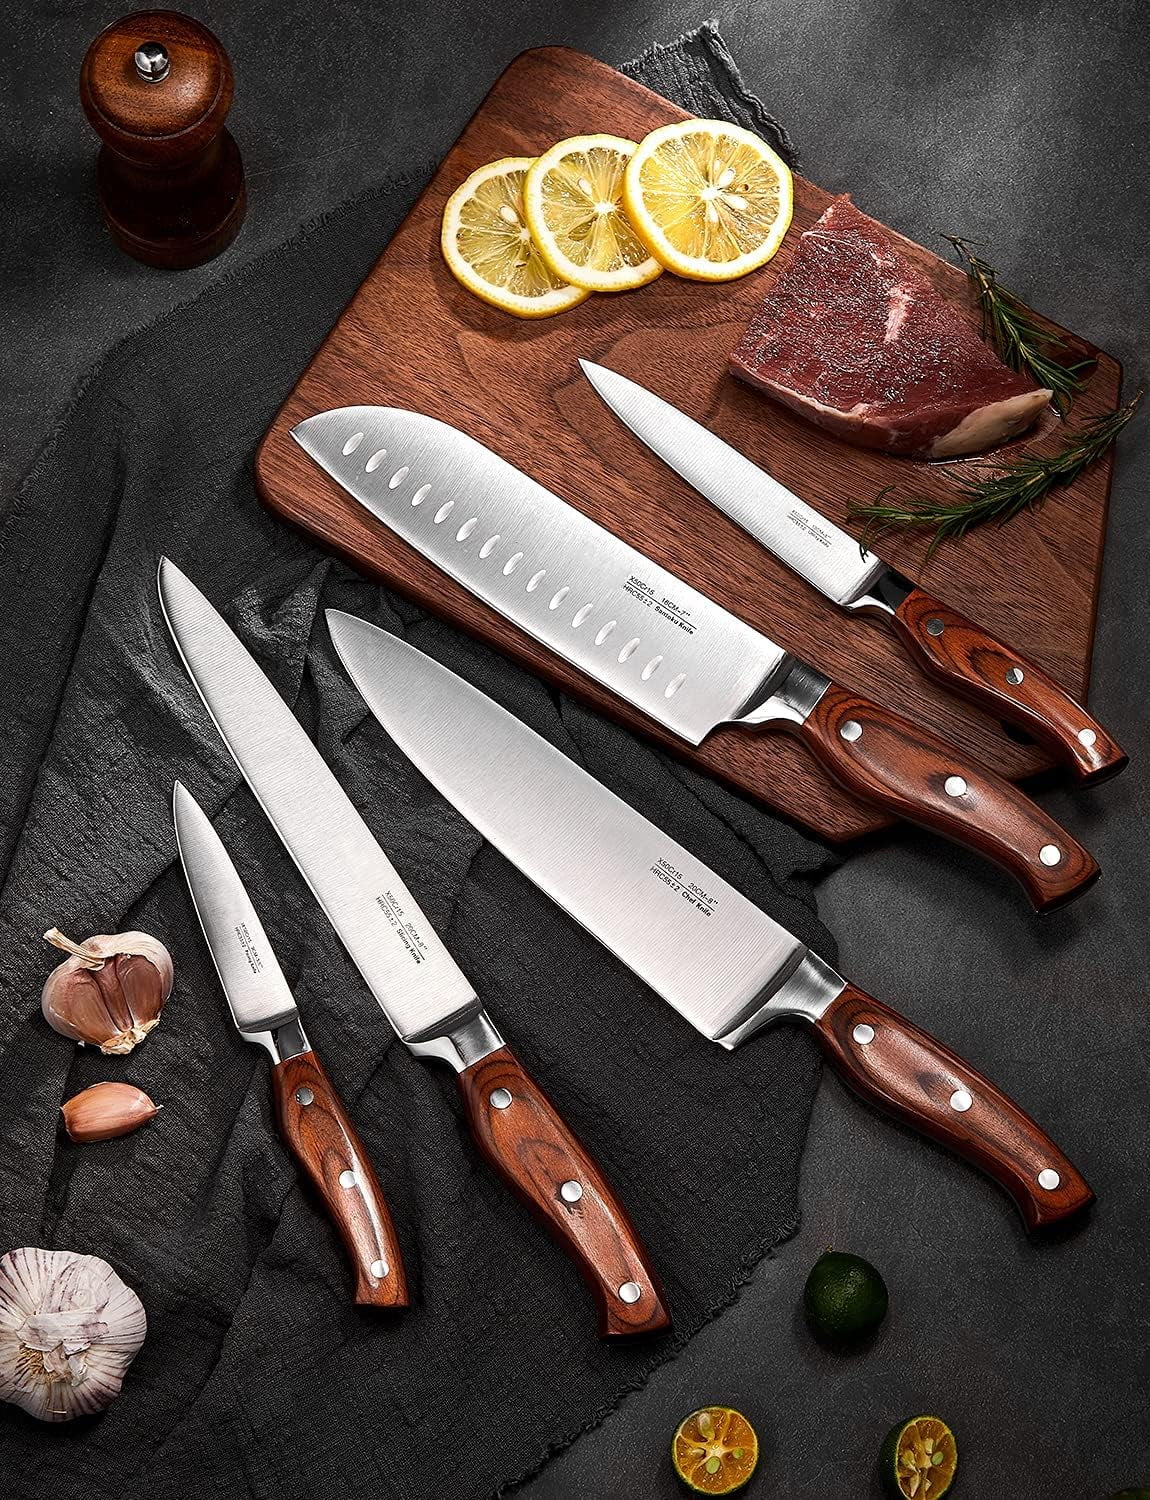 Kitchen Knife Set with Block WELLSTAR 6 Piece Knives Universal Holder Set German Stainless Steel Blade Non Stick Coated Chef Carving Bread Utility